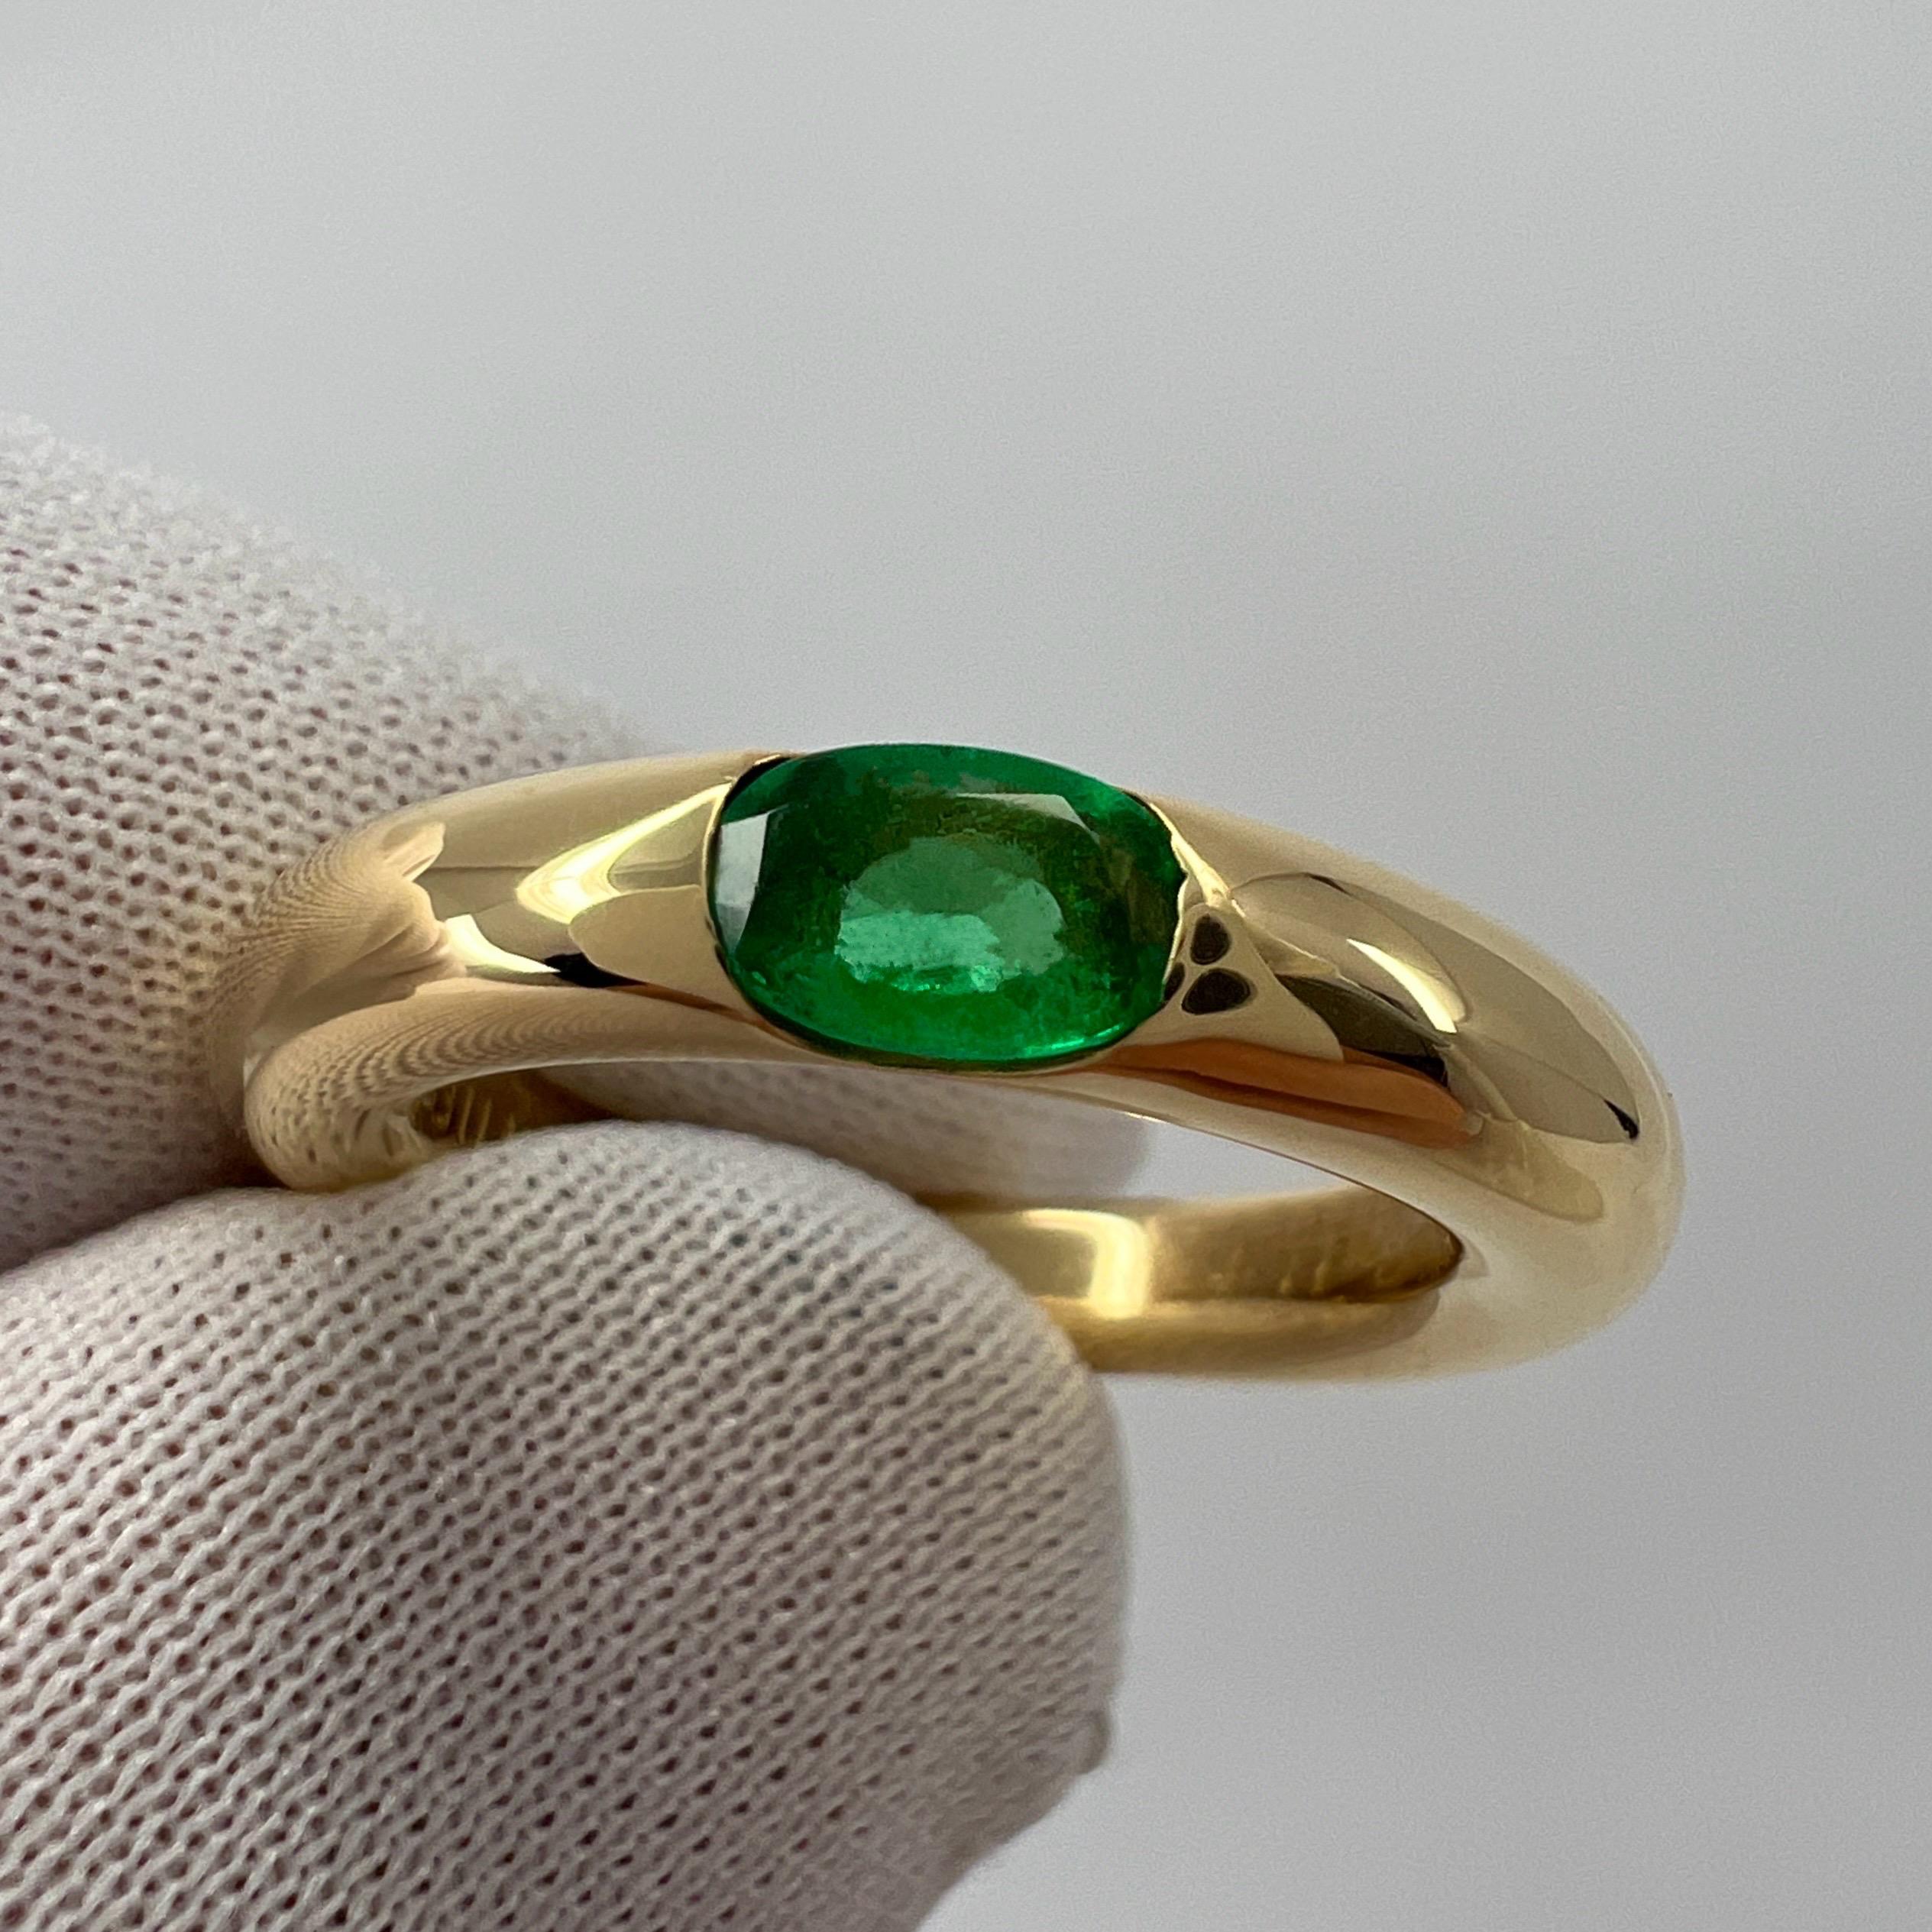 Vintage Cartier Emerald Vivid Green Ellipse 18k Yellow Gold Solitaire Ring 52 For Sale 4